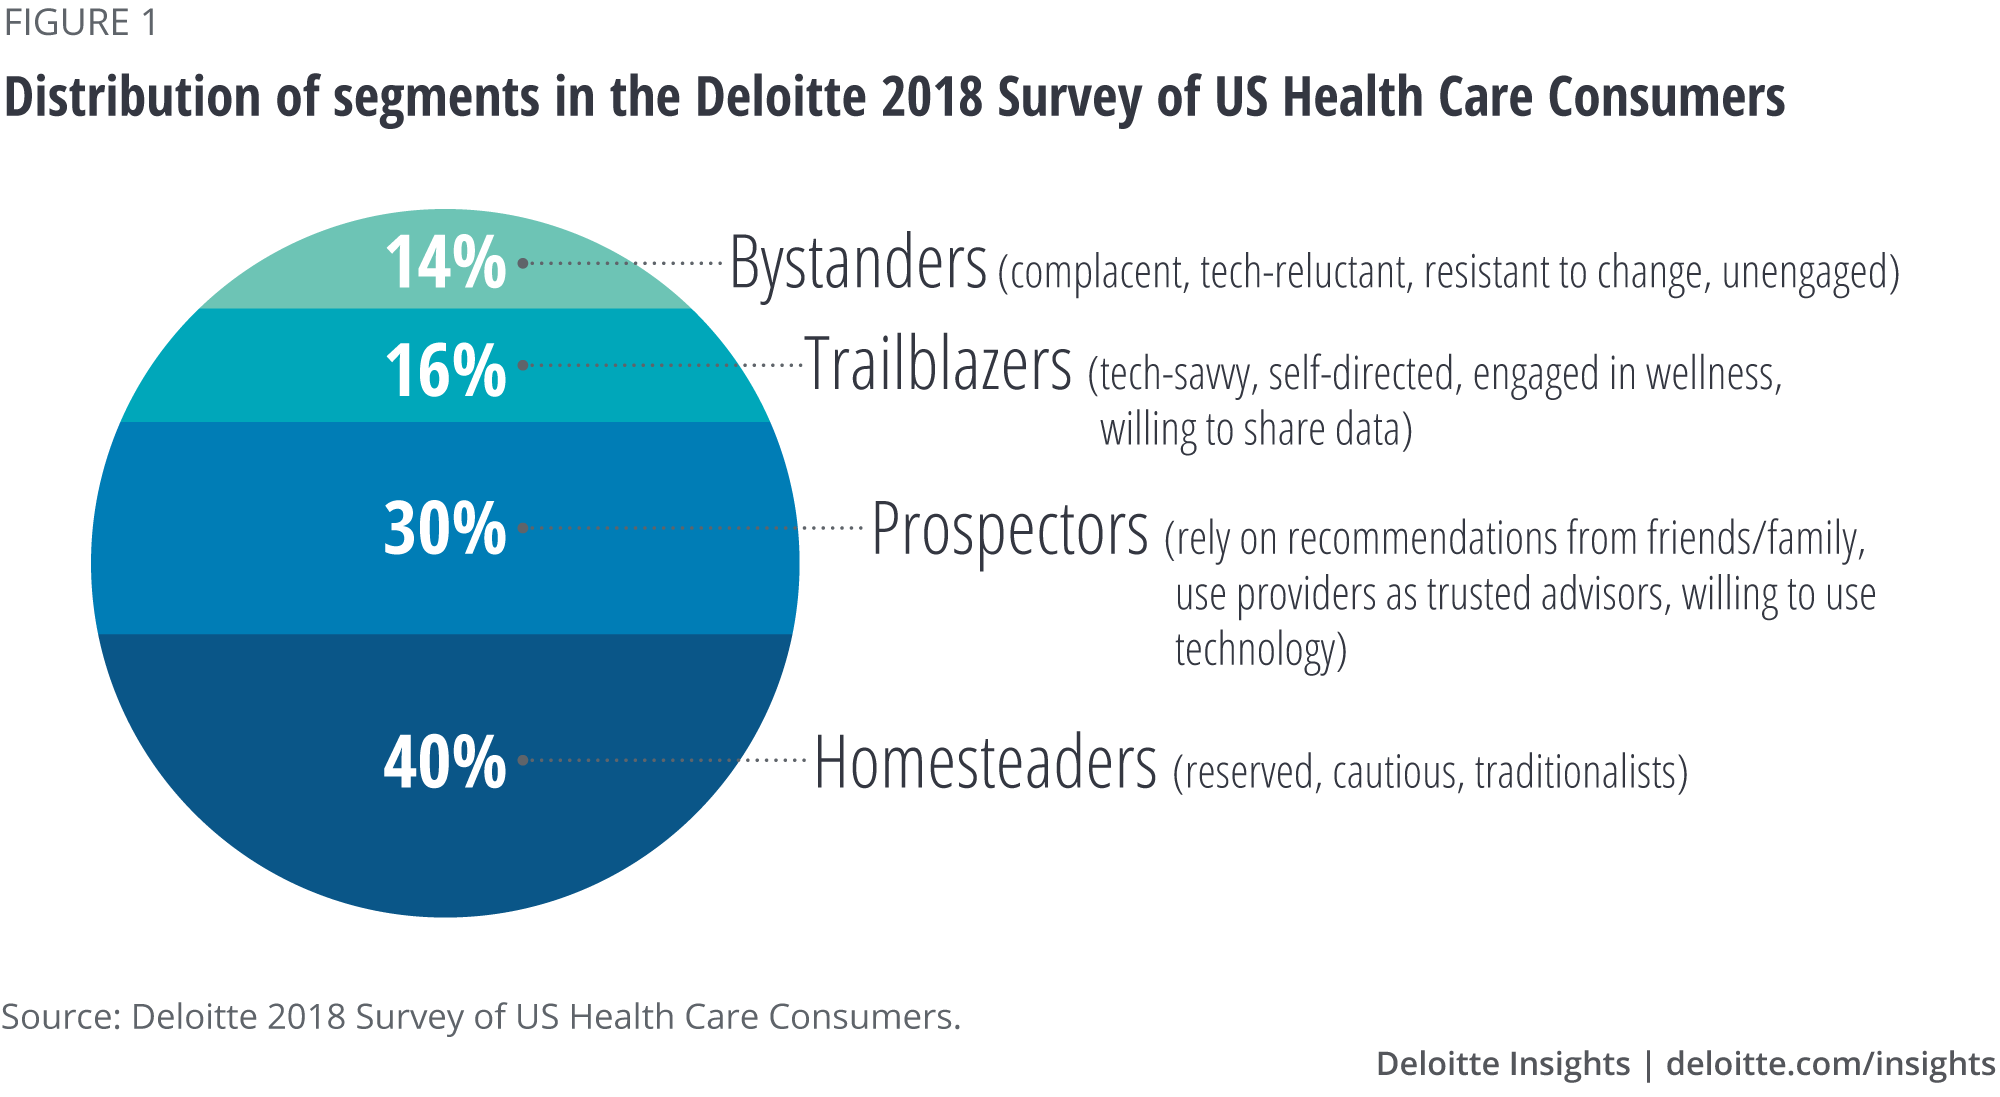 Distribution of segments in the Deloitte 2018 Survey of US Health Care Consumers